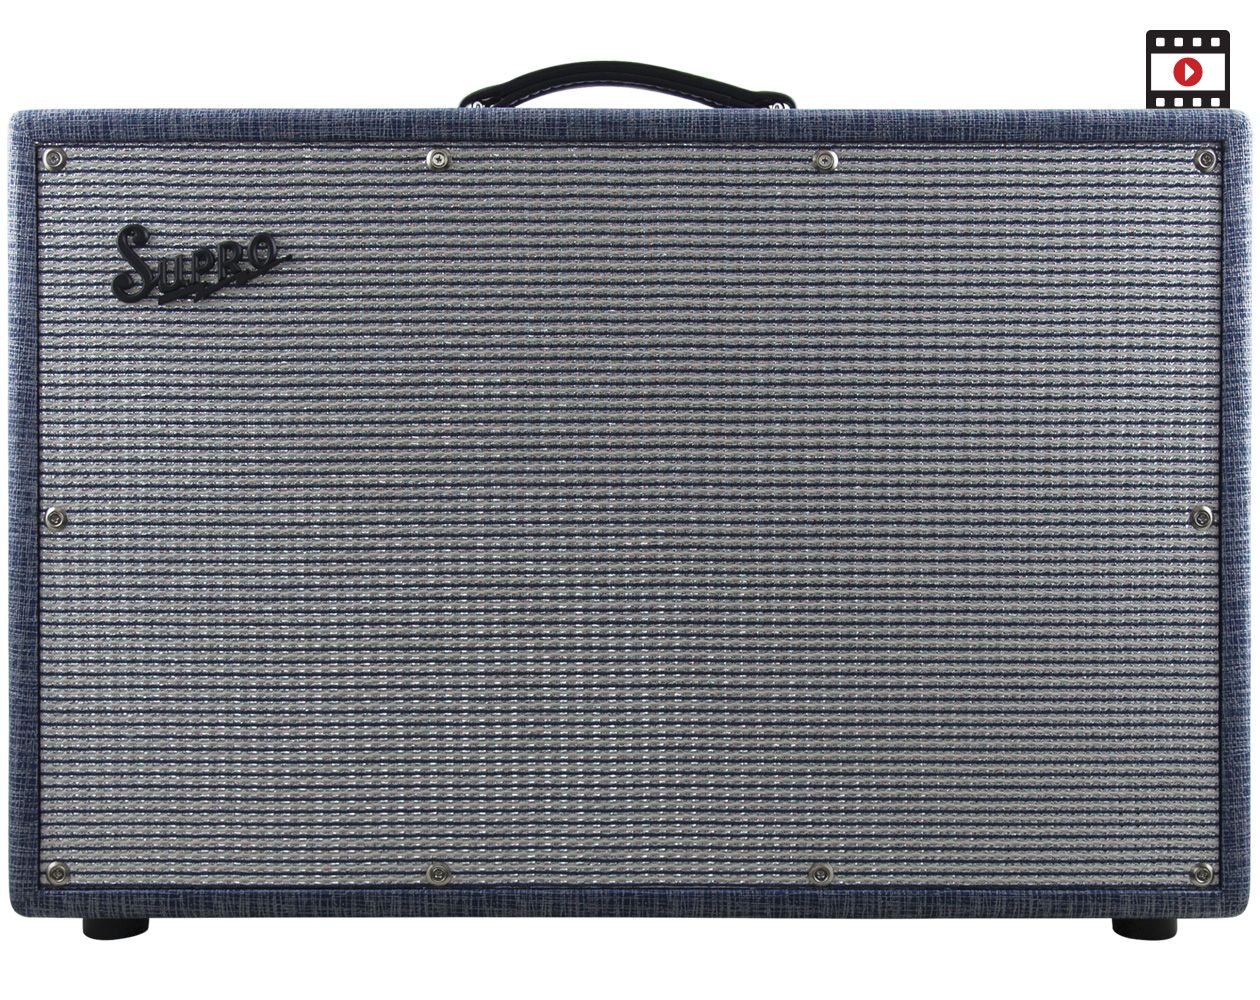 Supro 1685RT Neptune Reverb Review